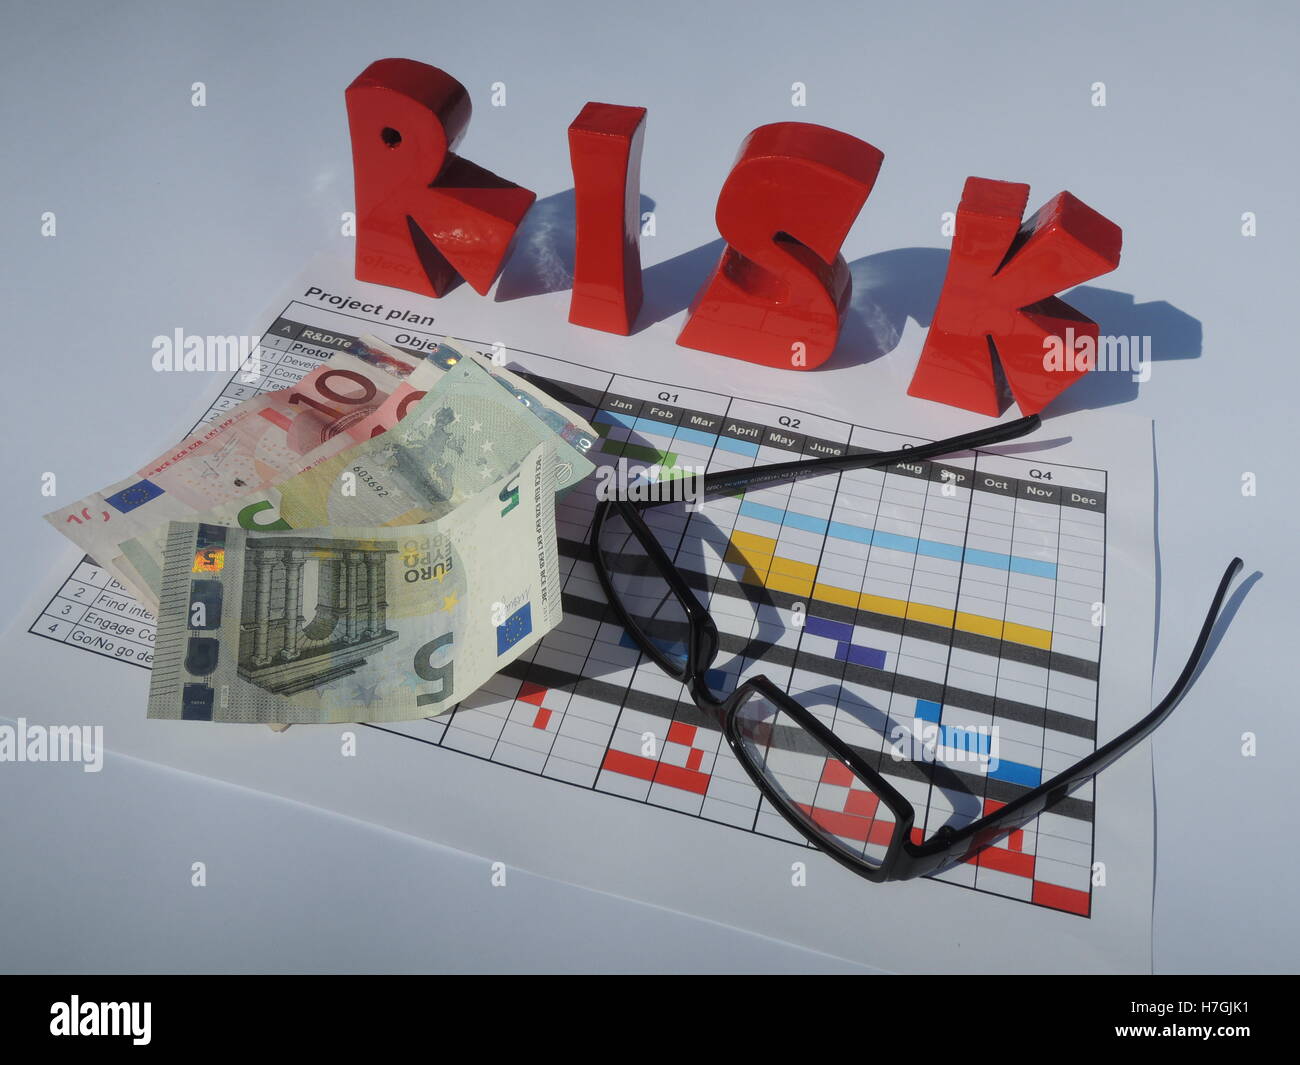 Financial risk concering the project plan Stock Photo